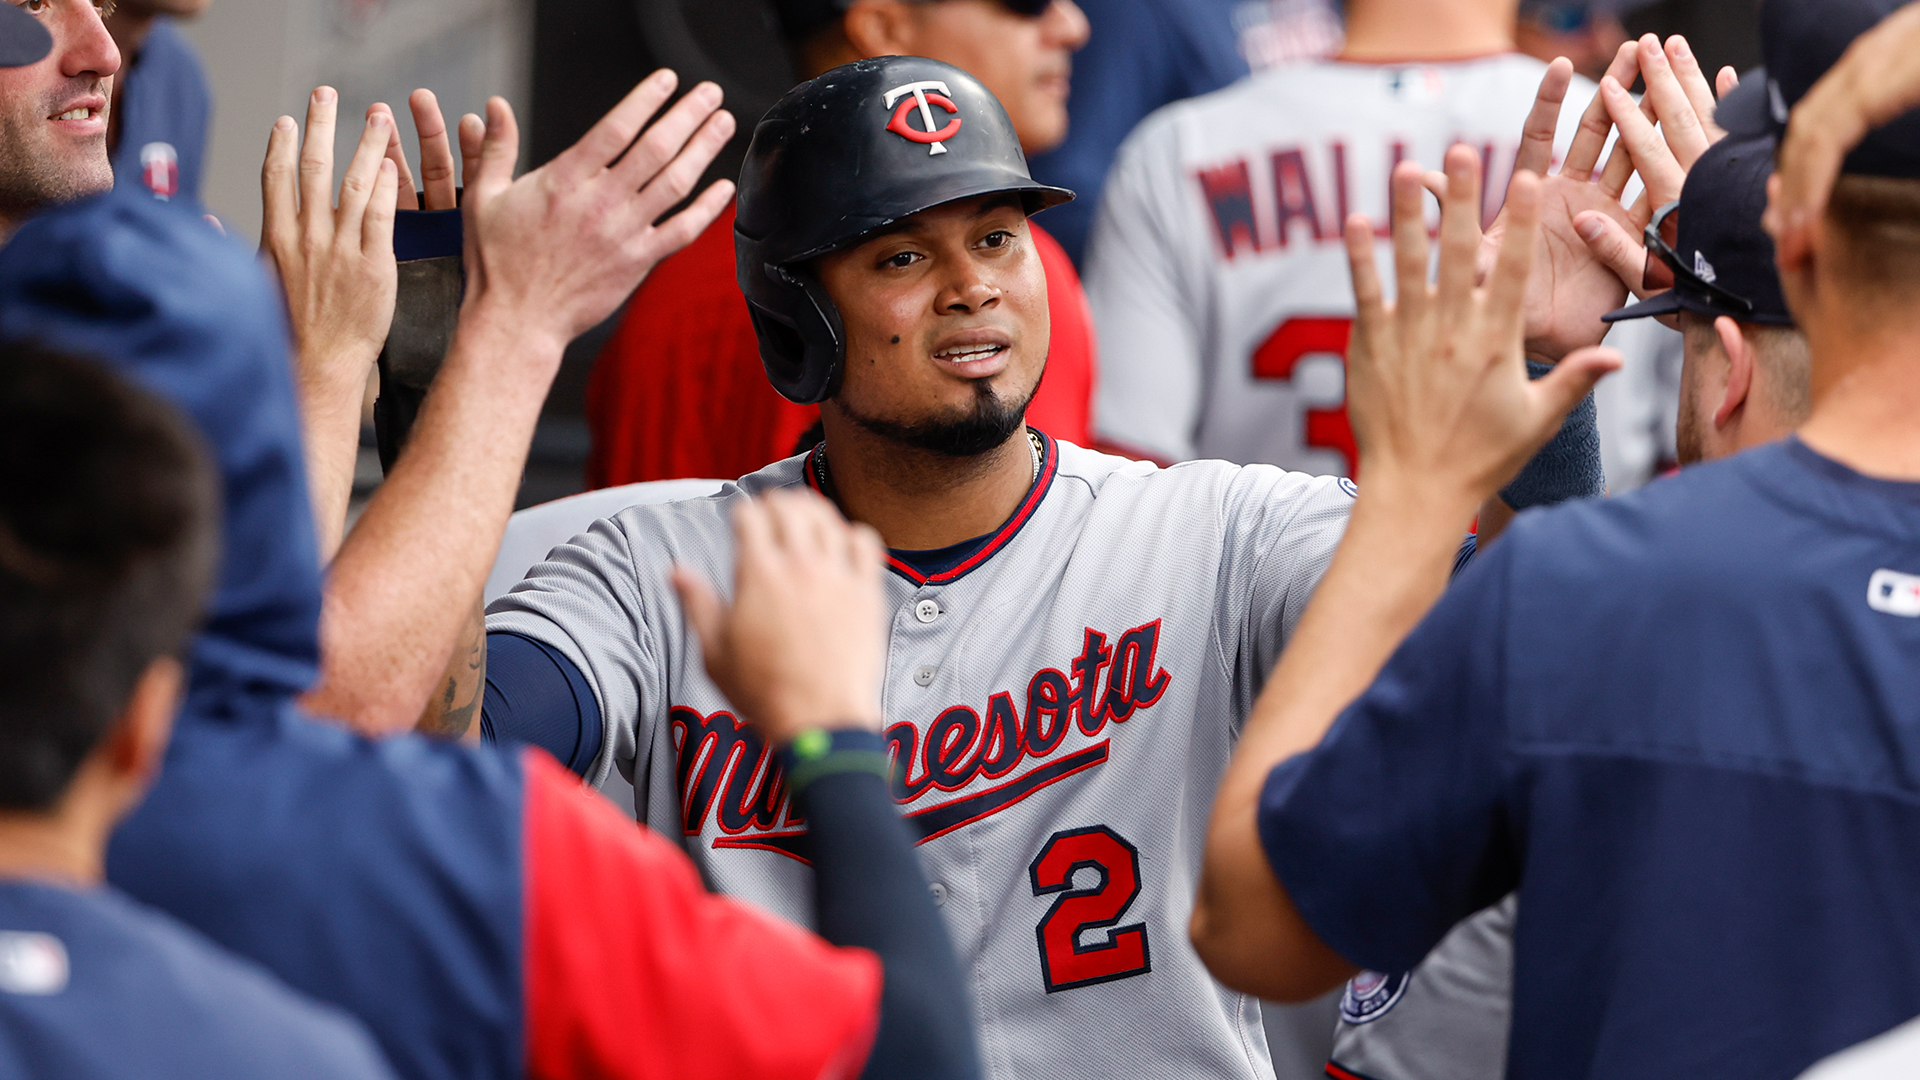 Twins trading Luis Arráez 'good for a couple wins' says White Sox official  – NBC Sports Chicago